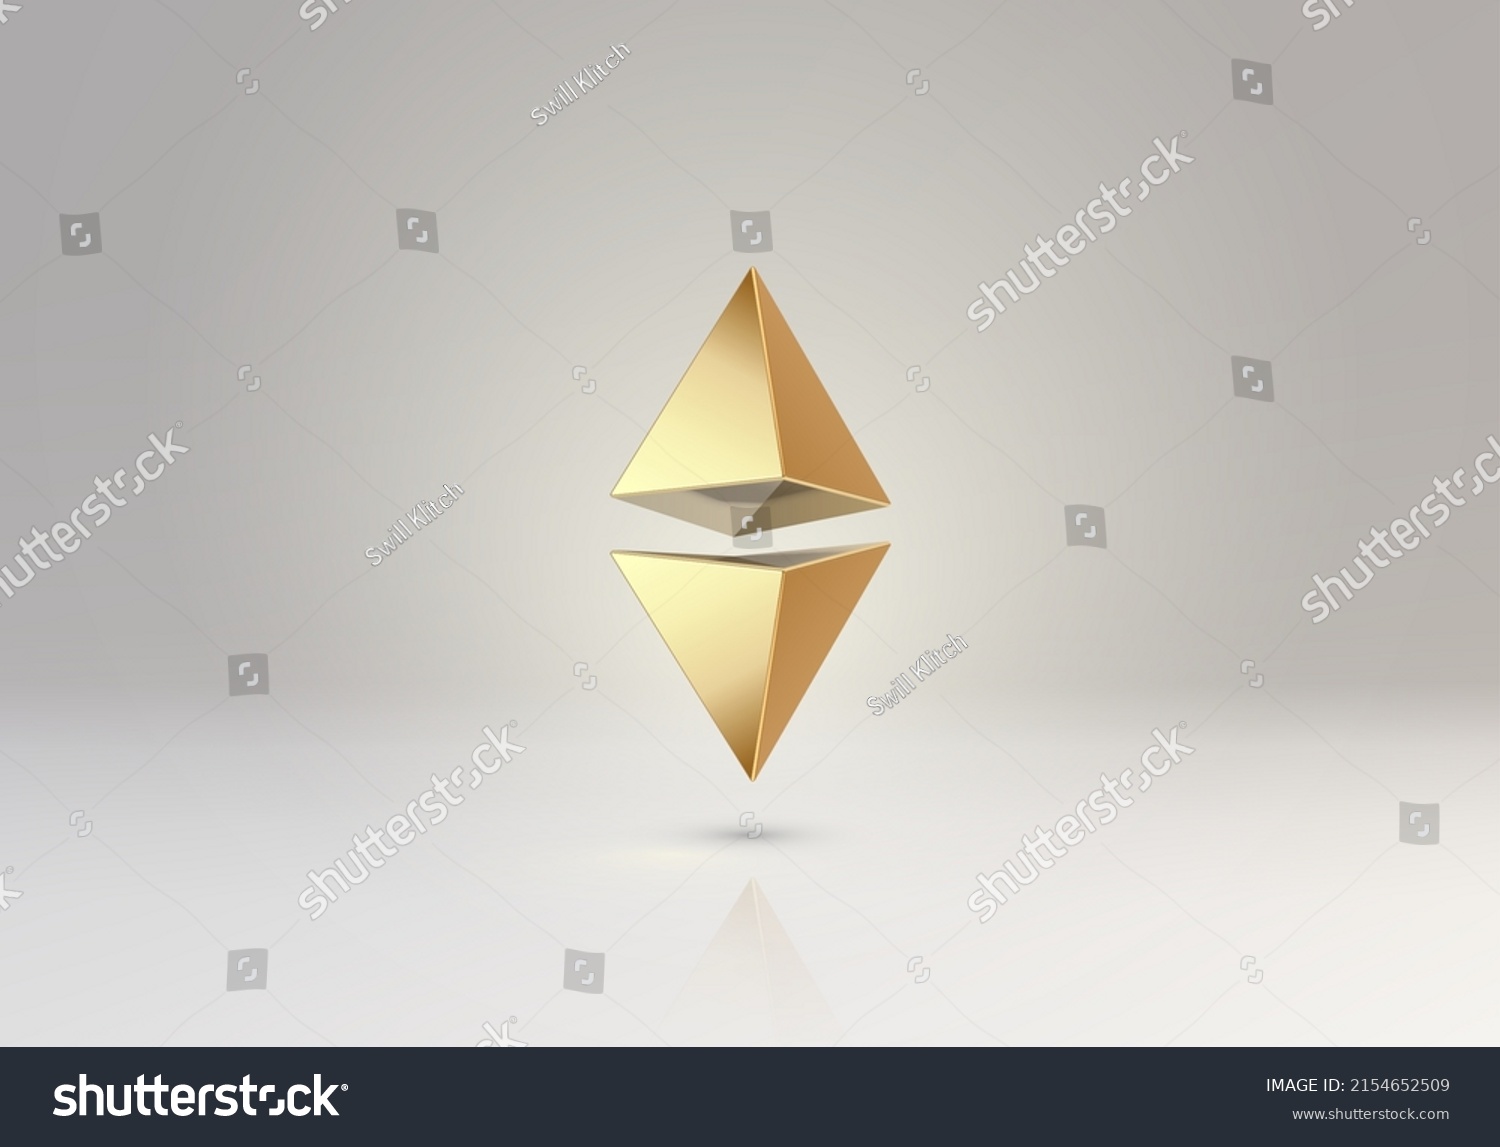 SVG of 3D vector element or simple isolated golden shape svg